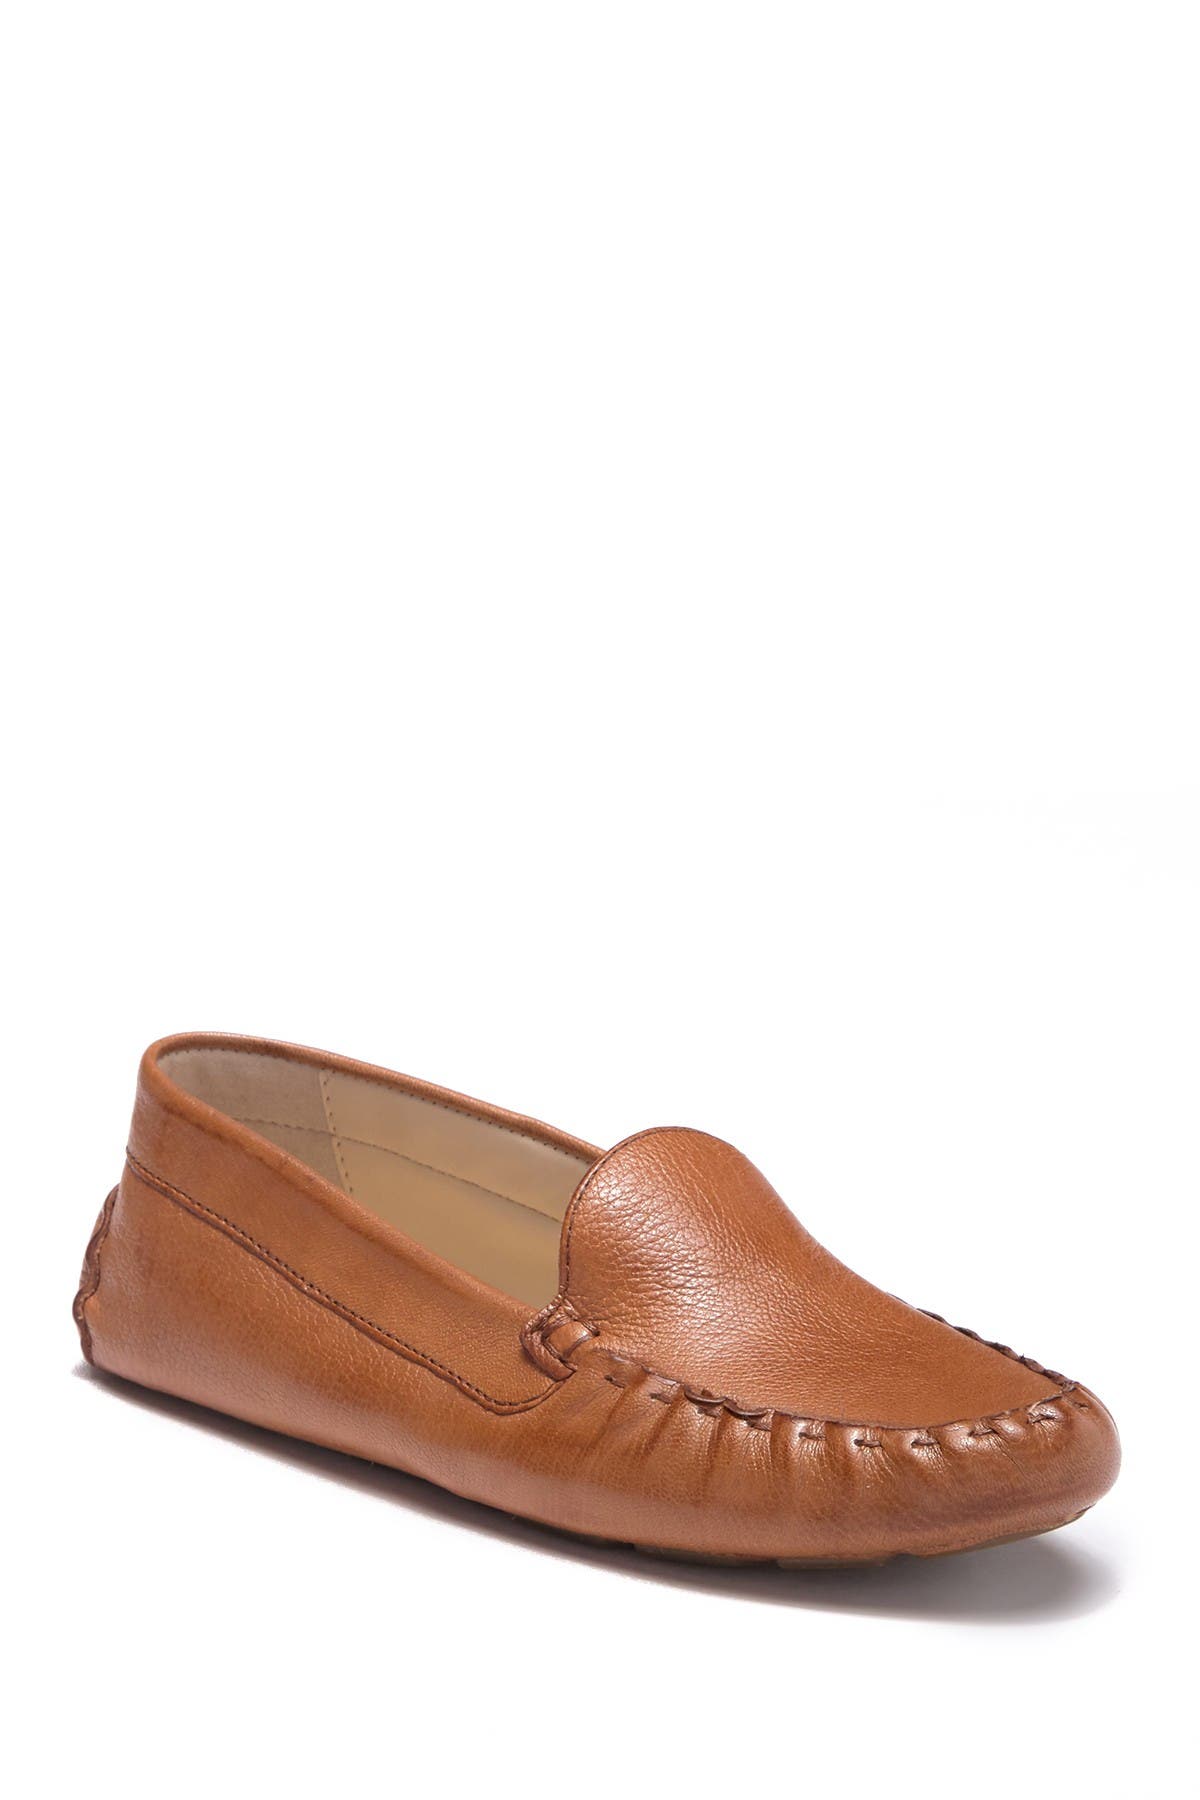 cole haan loafers nordstrom